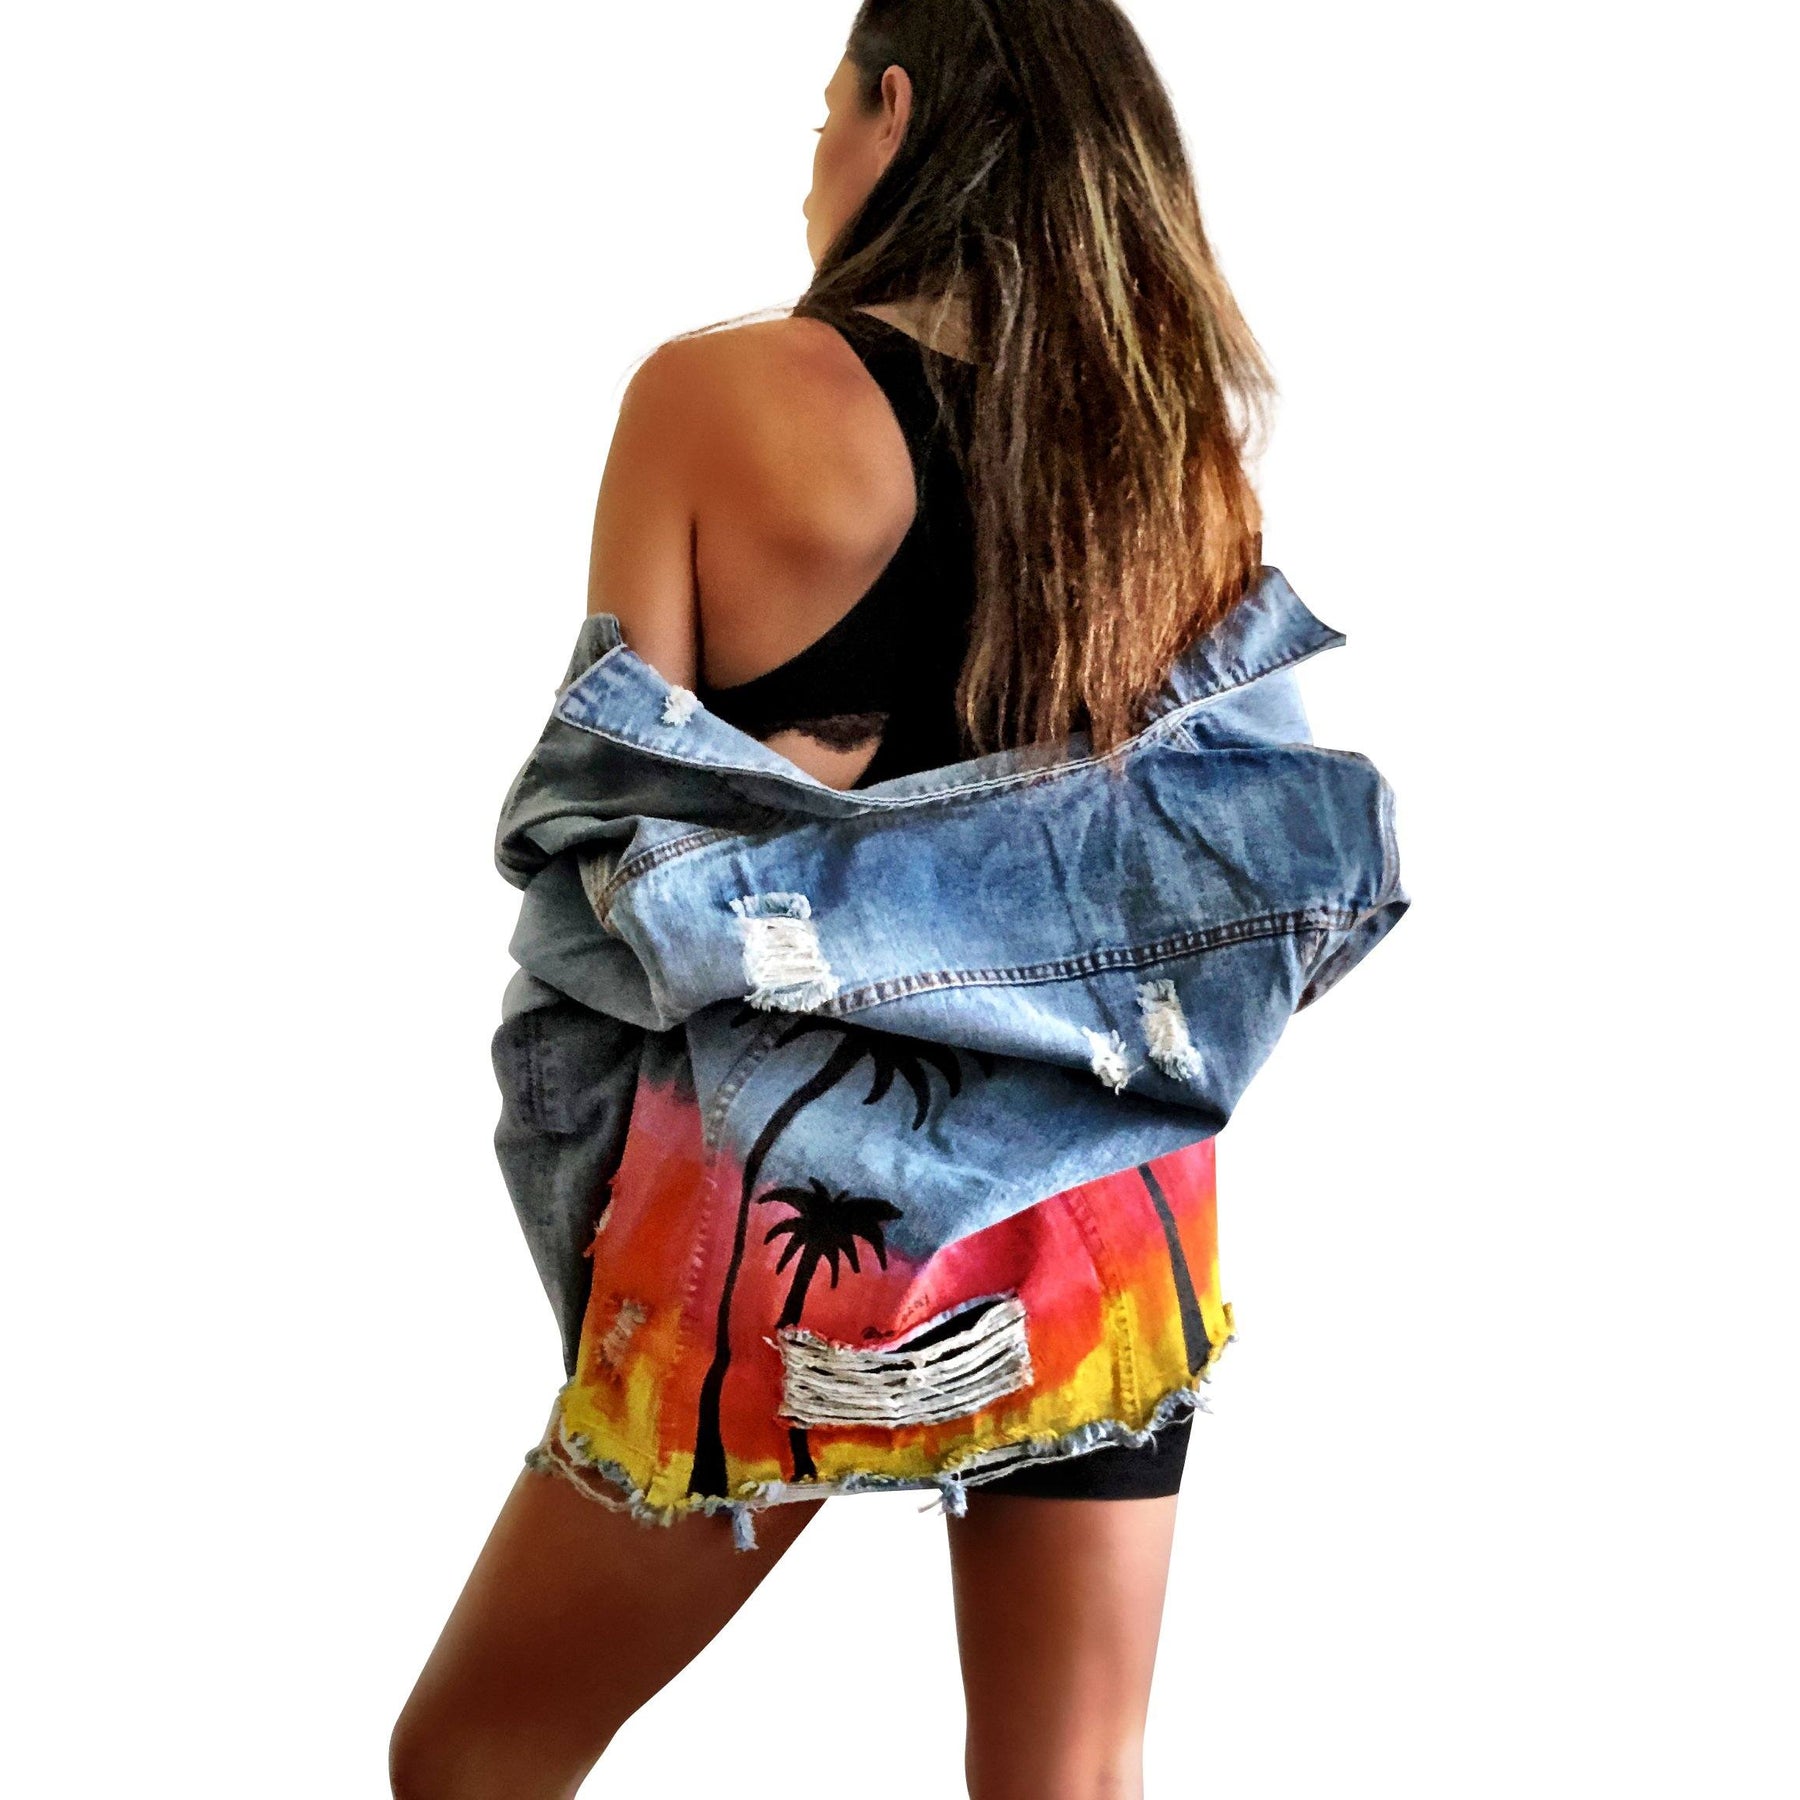 Medium blue denim wash. Heavily inspired by Coachella with ombre sunset colors painted along entire bottom half of jacket, with black silhouettes of Palm Trees surrounding. Button painted black. Signed @wrenandglory.